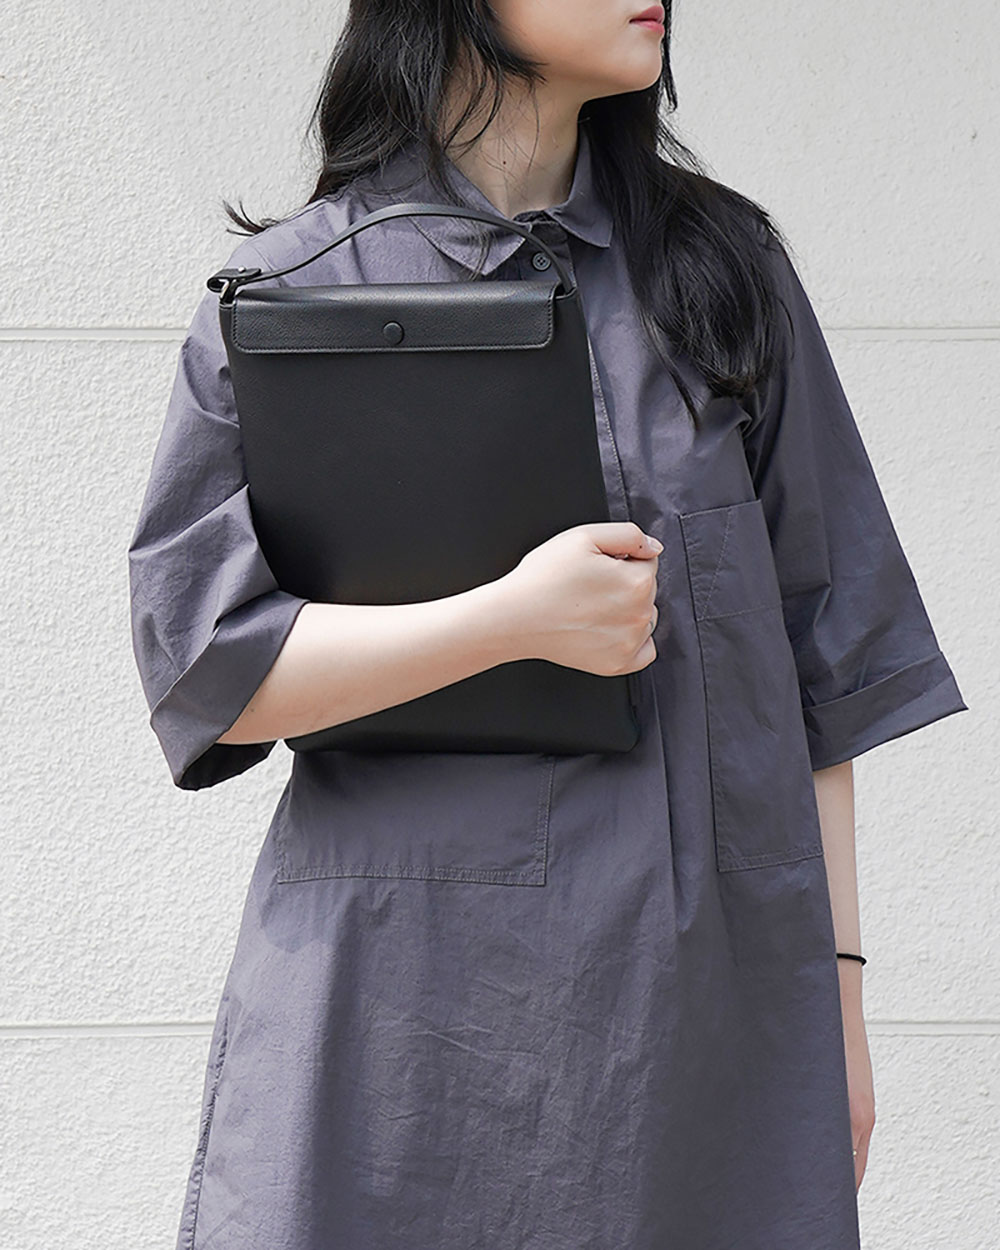 Proper laptop pouch with handle